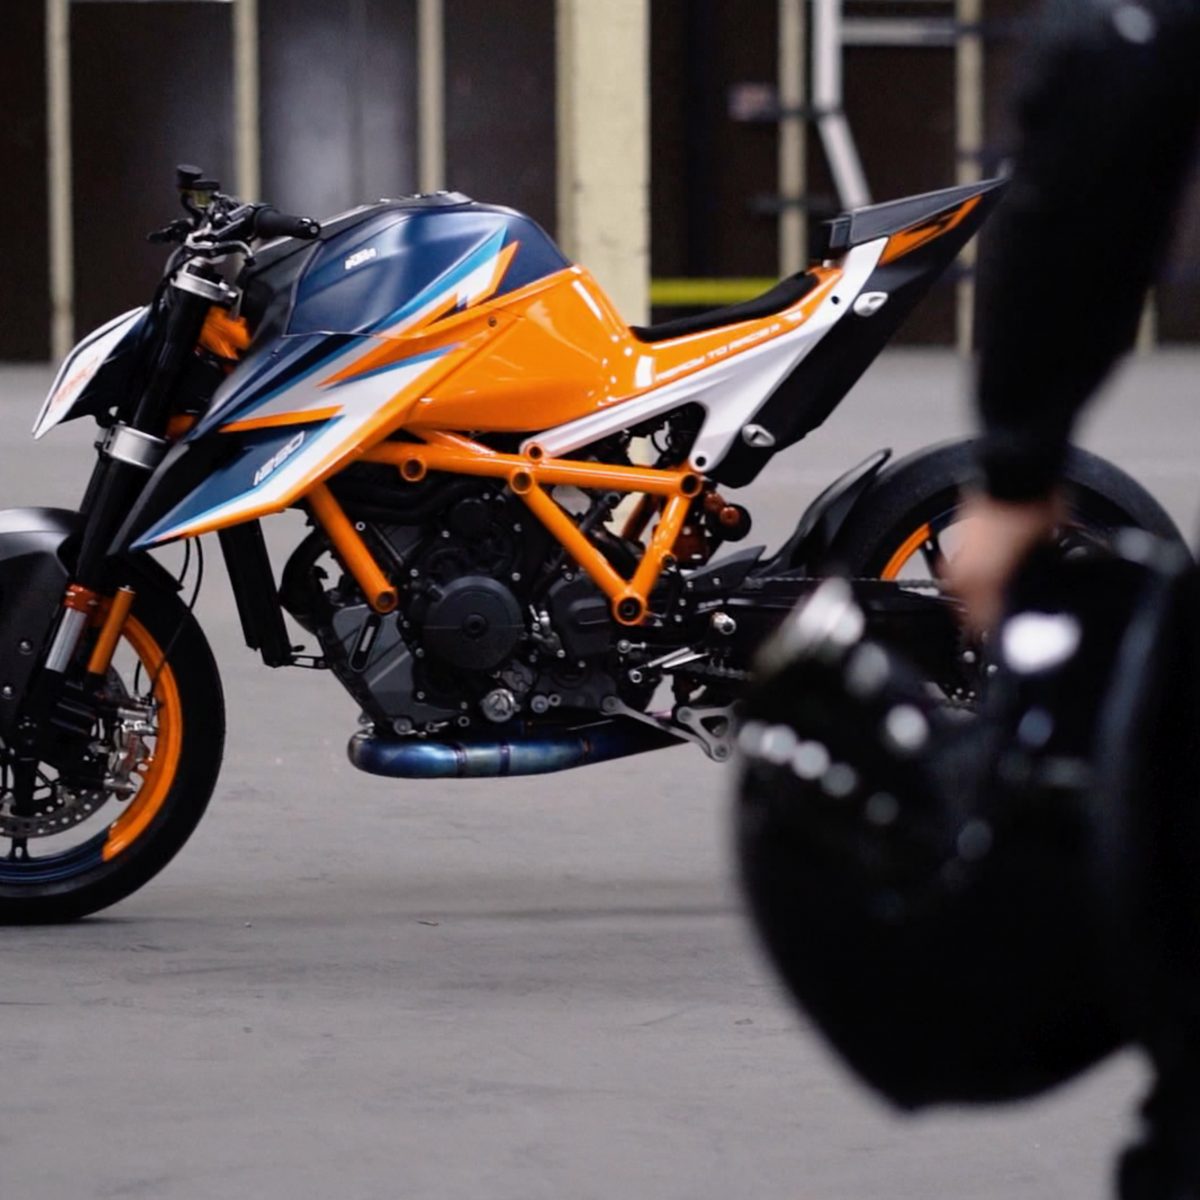 Side view of KTM 1290 Super Duke R in a warehouse